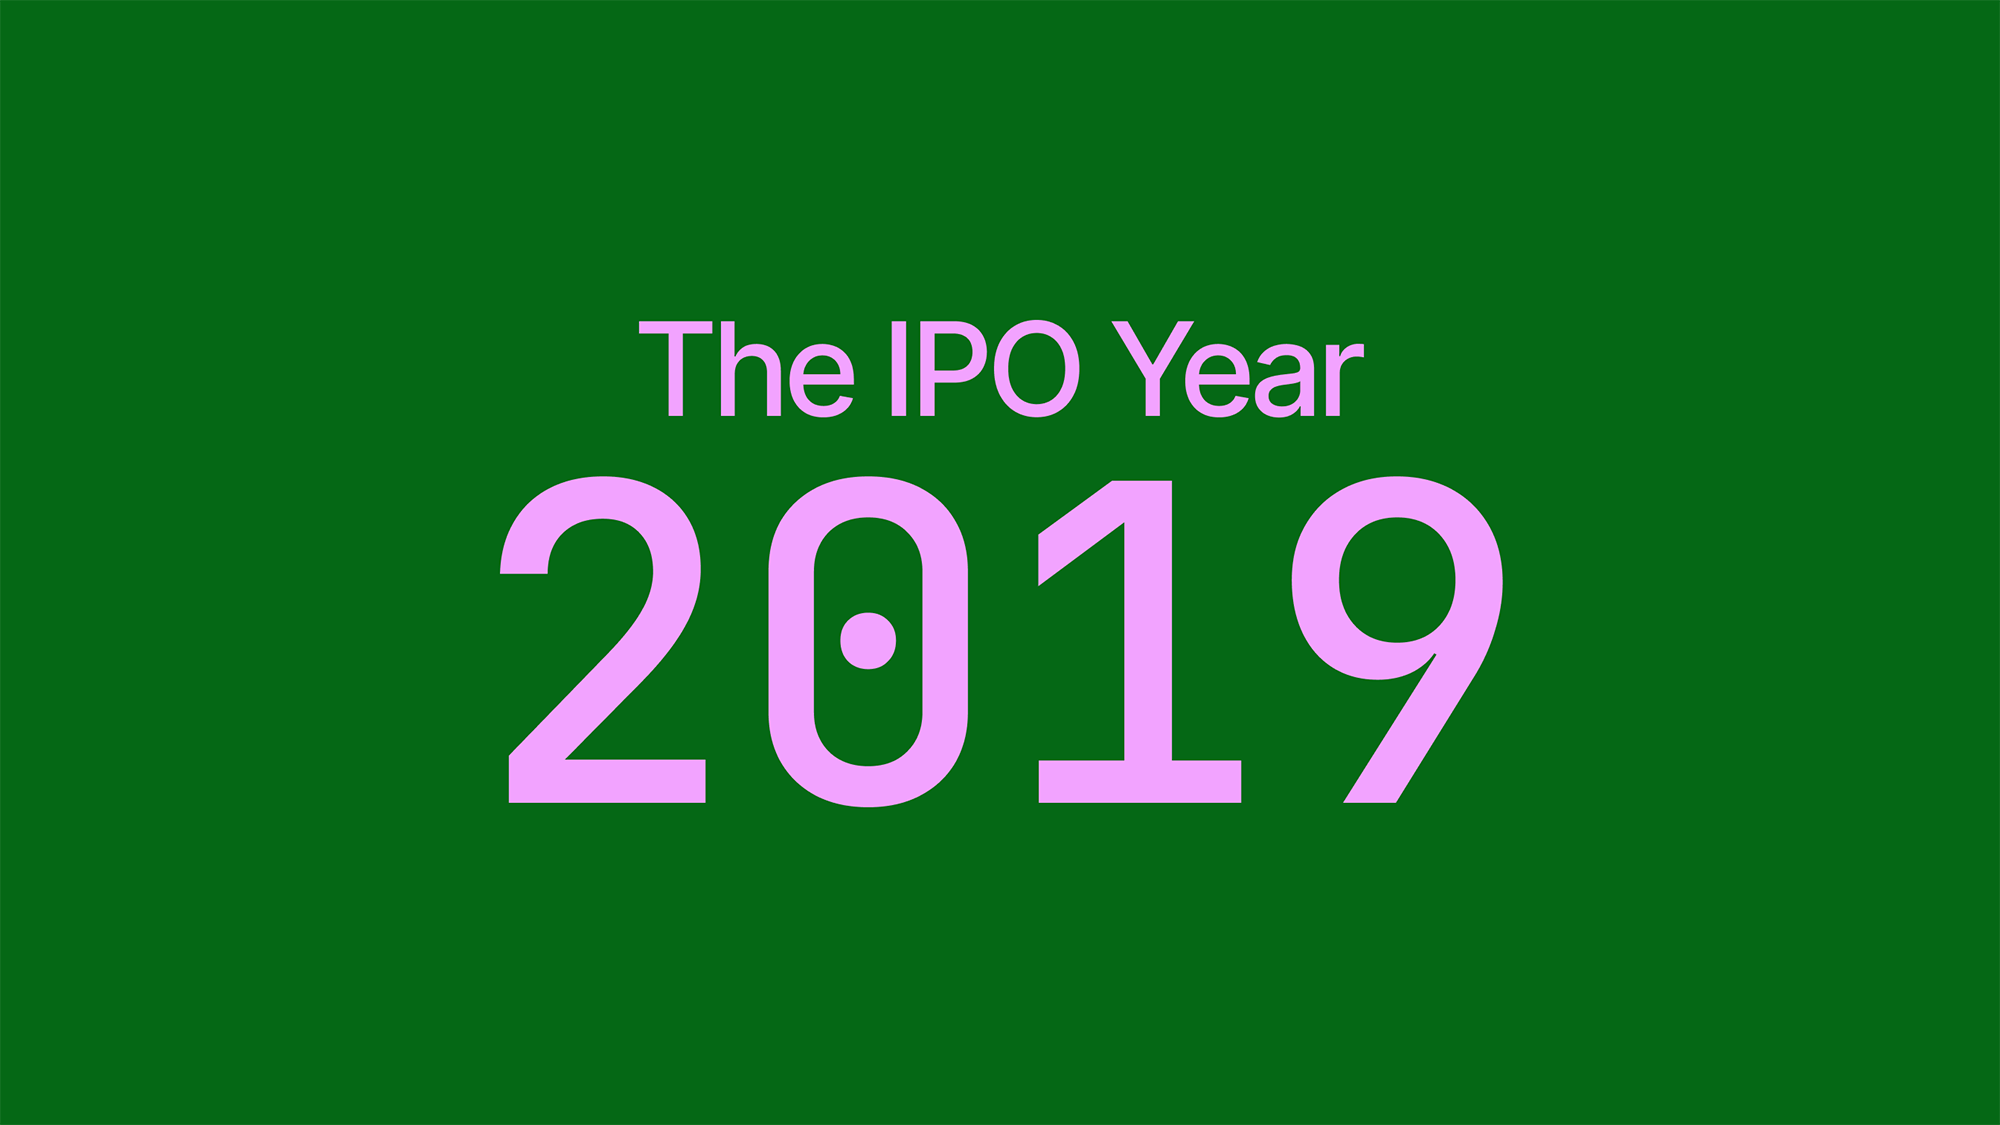 The IPO Year 2019